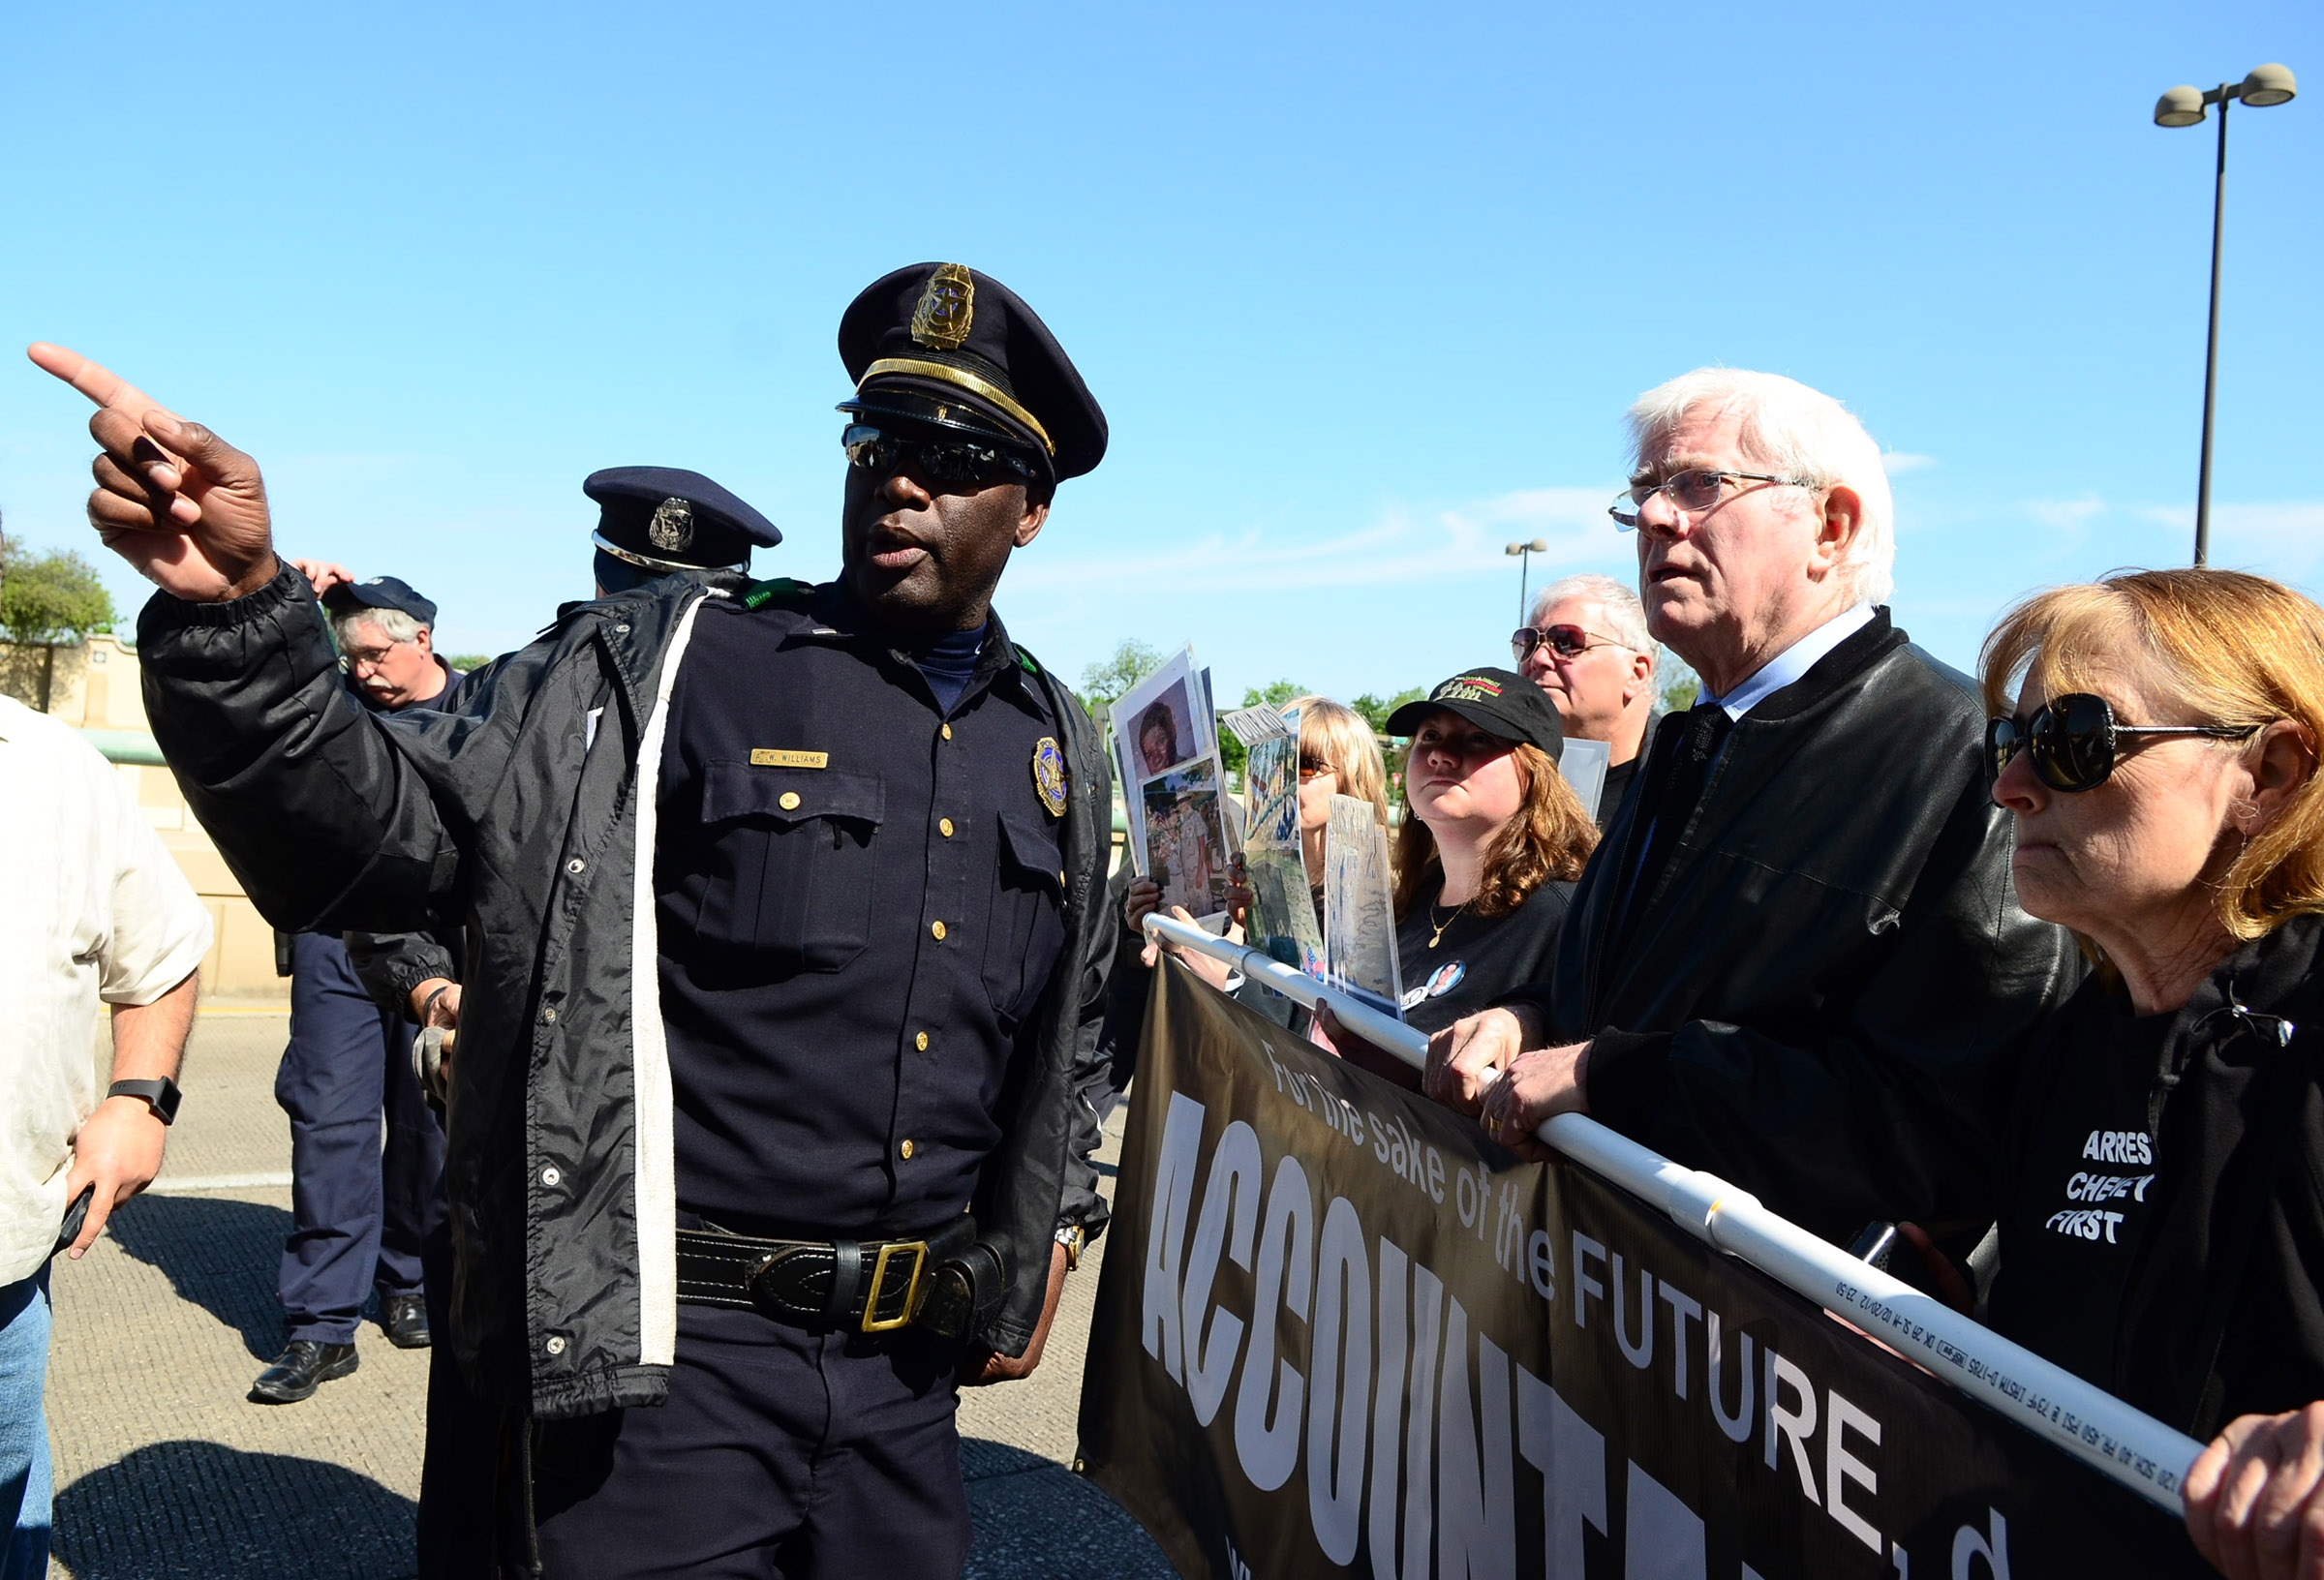 Former TV talk show host Phil Donahue leads a march with other protestors down the North Central Expressway service road.